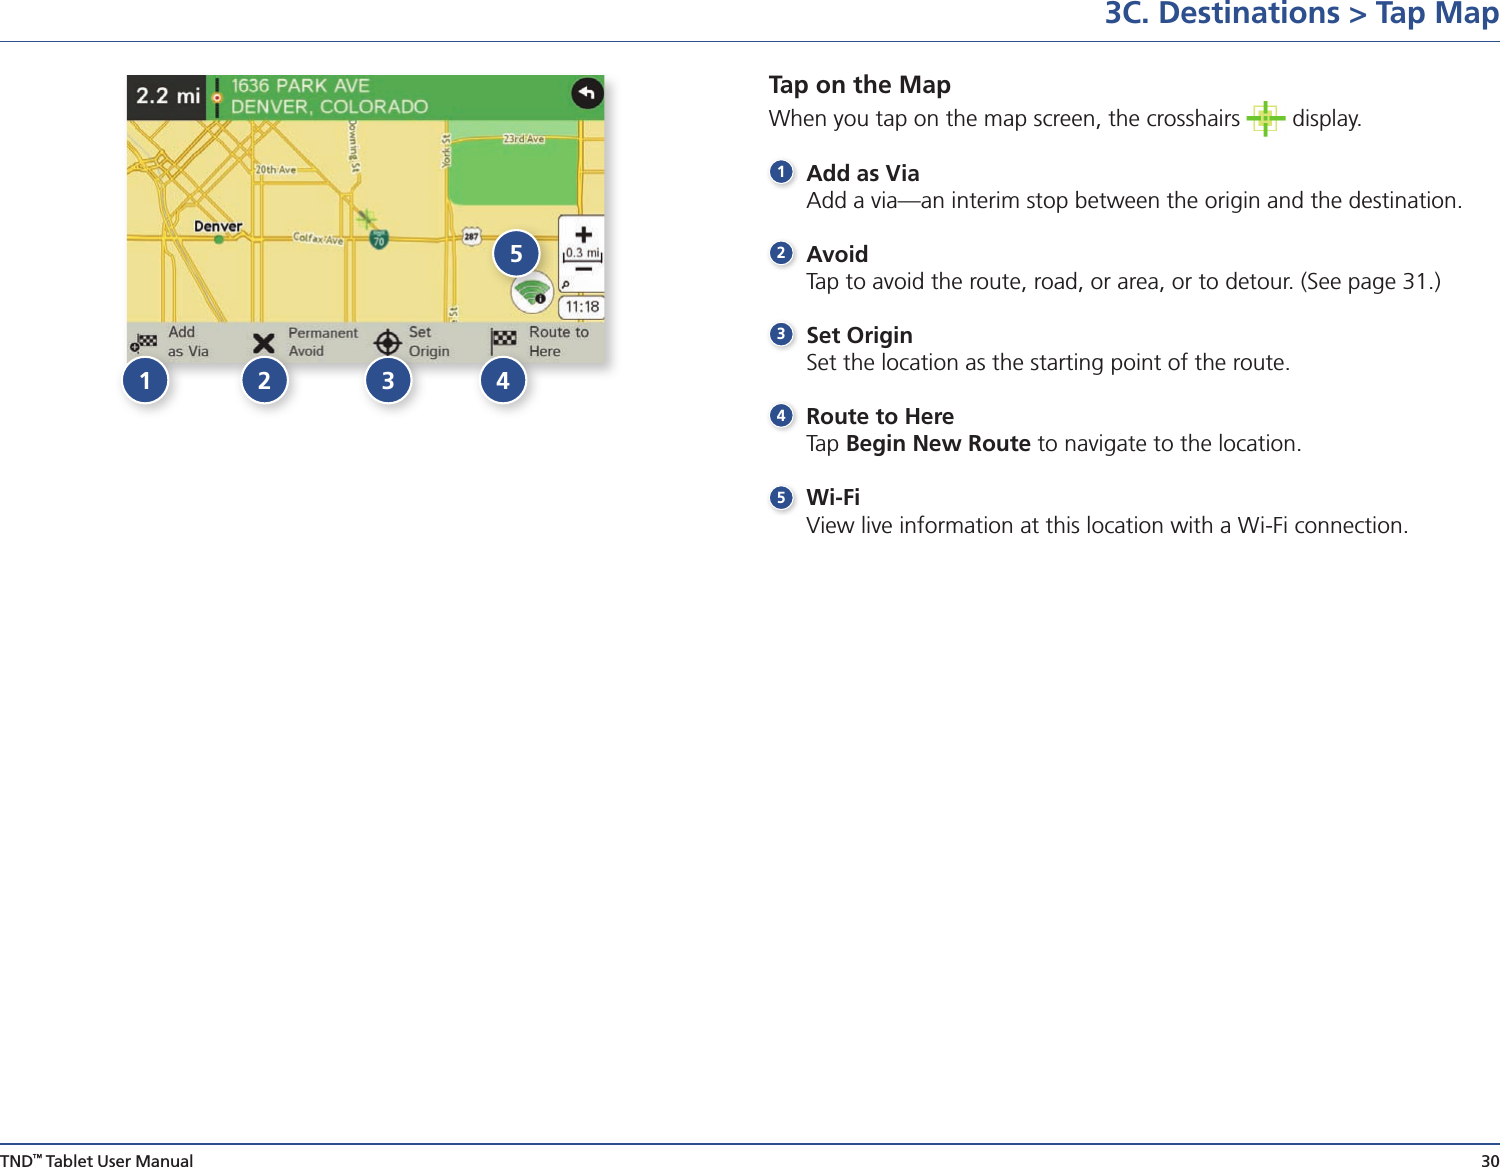 TND™ Tablet User Manual 30Tap on the Map When you tap on the map screen, the crosshairs   display. 1 Add as Via  Add a via—an interim stop between the origin and the destination.2 Avoid  Tap to avoid the route, road, or area, or to detour. (See page 31.)3 Set Origin  Set the location as the starting point of the route.4 Route to Here Tap Begin New Route to navigate to the location.5 Wi-Fi  View live information at this location with a Wi-Fi connection. 3C. Destinations &gt; Tap Map123 45